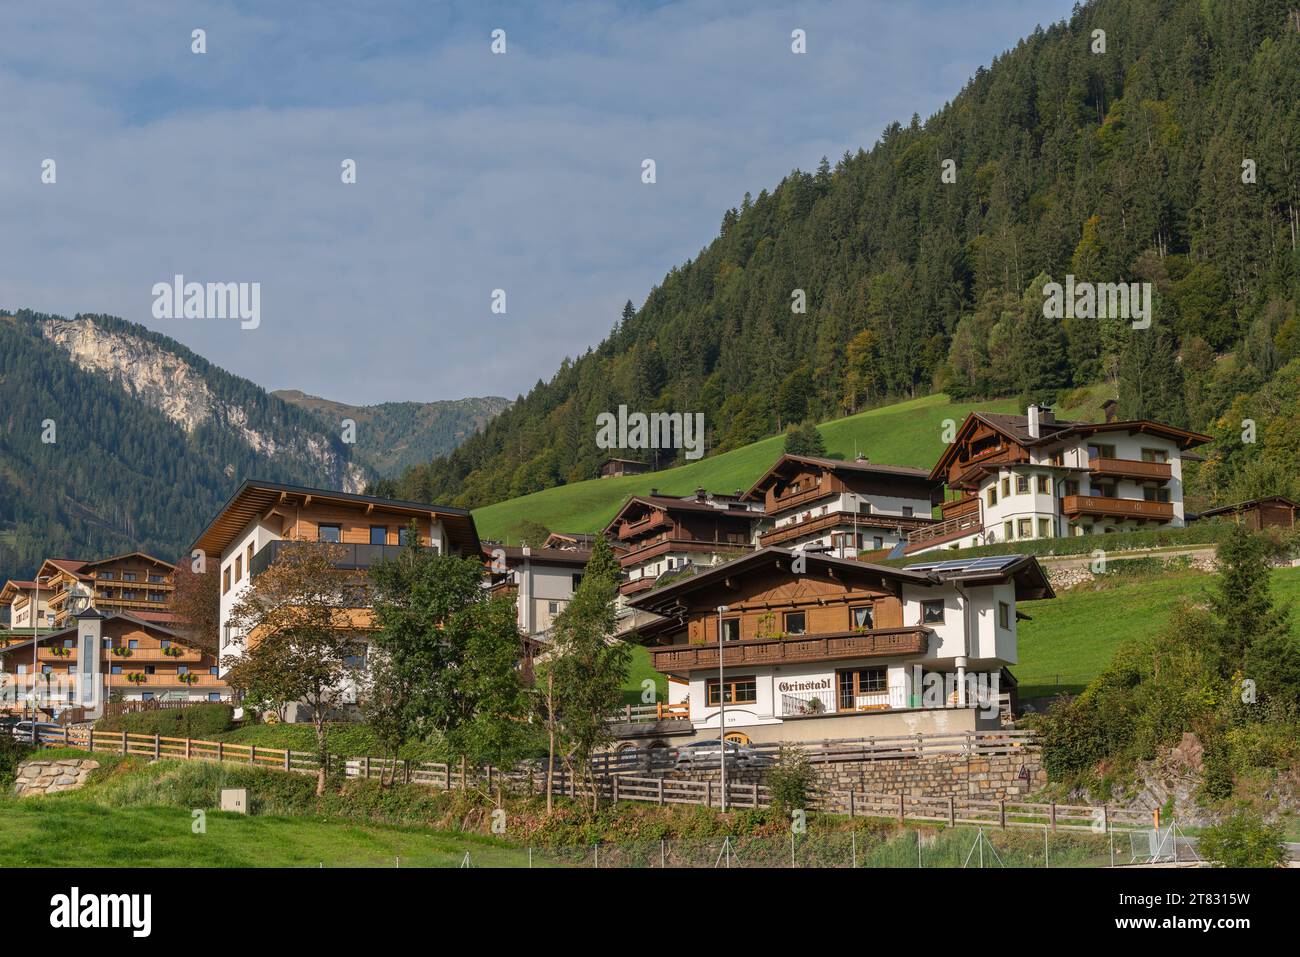 Typical Tyrolean houses with wooden gable and balcony in Finkenberg community, Valley Tuxertal, The Apls, Zillertaler Alpen, Tiyol, Austria, Europe Stock Photo